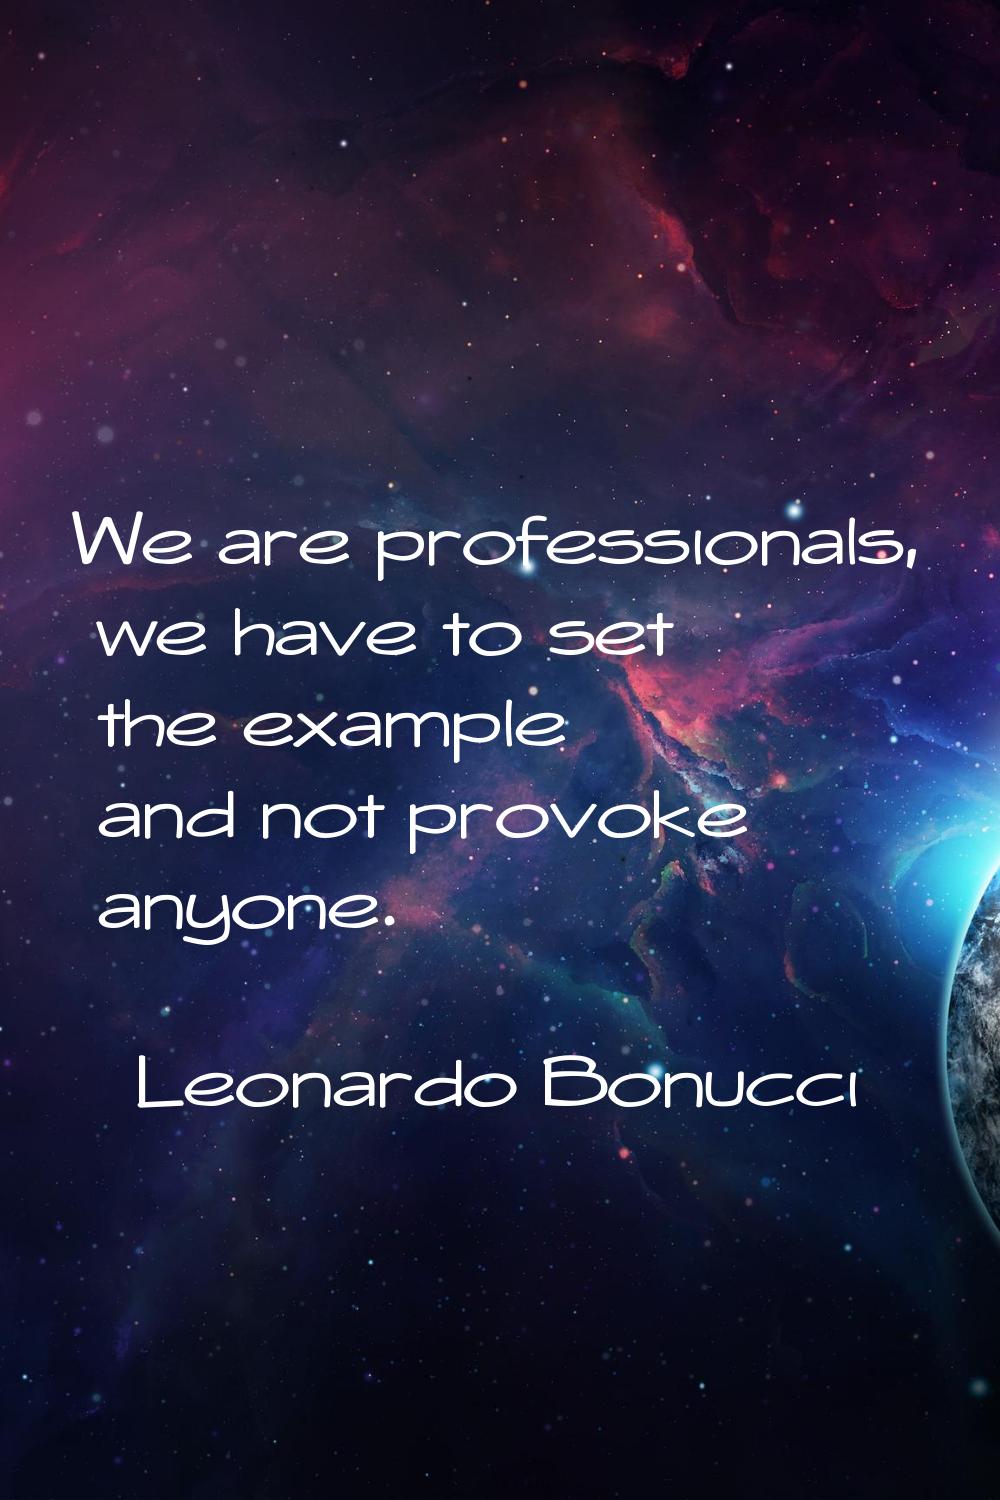 We are professionals, we have to set the example and not provoke anyone.